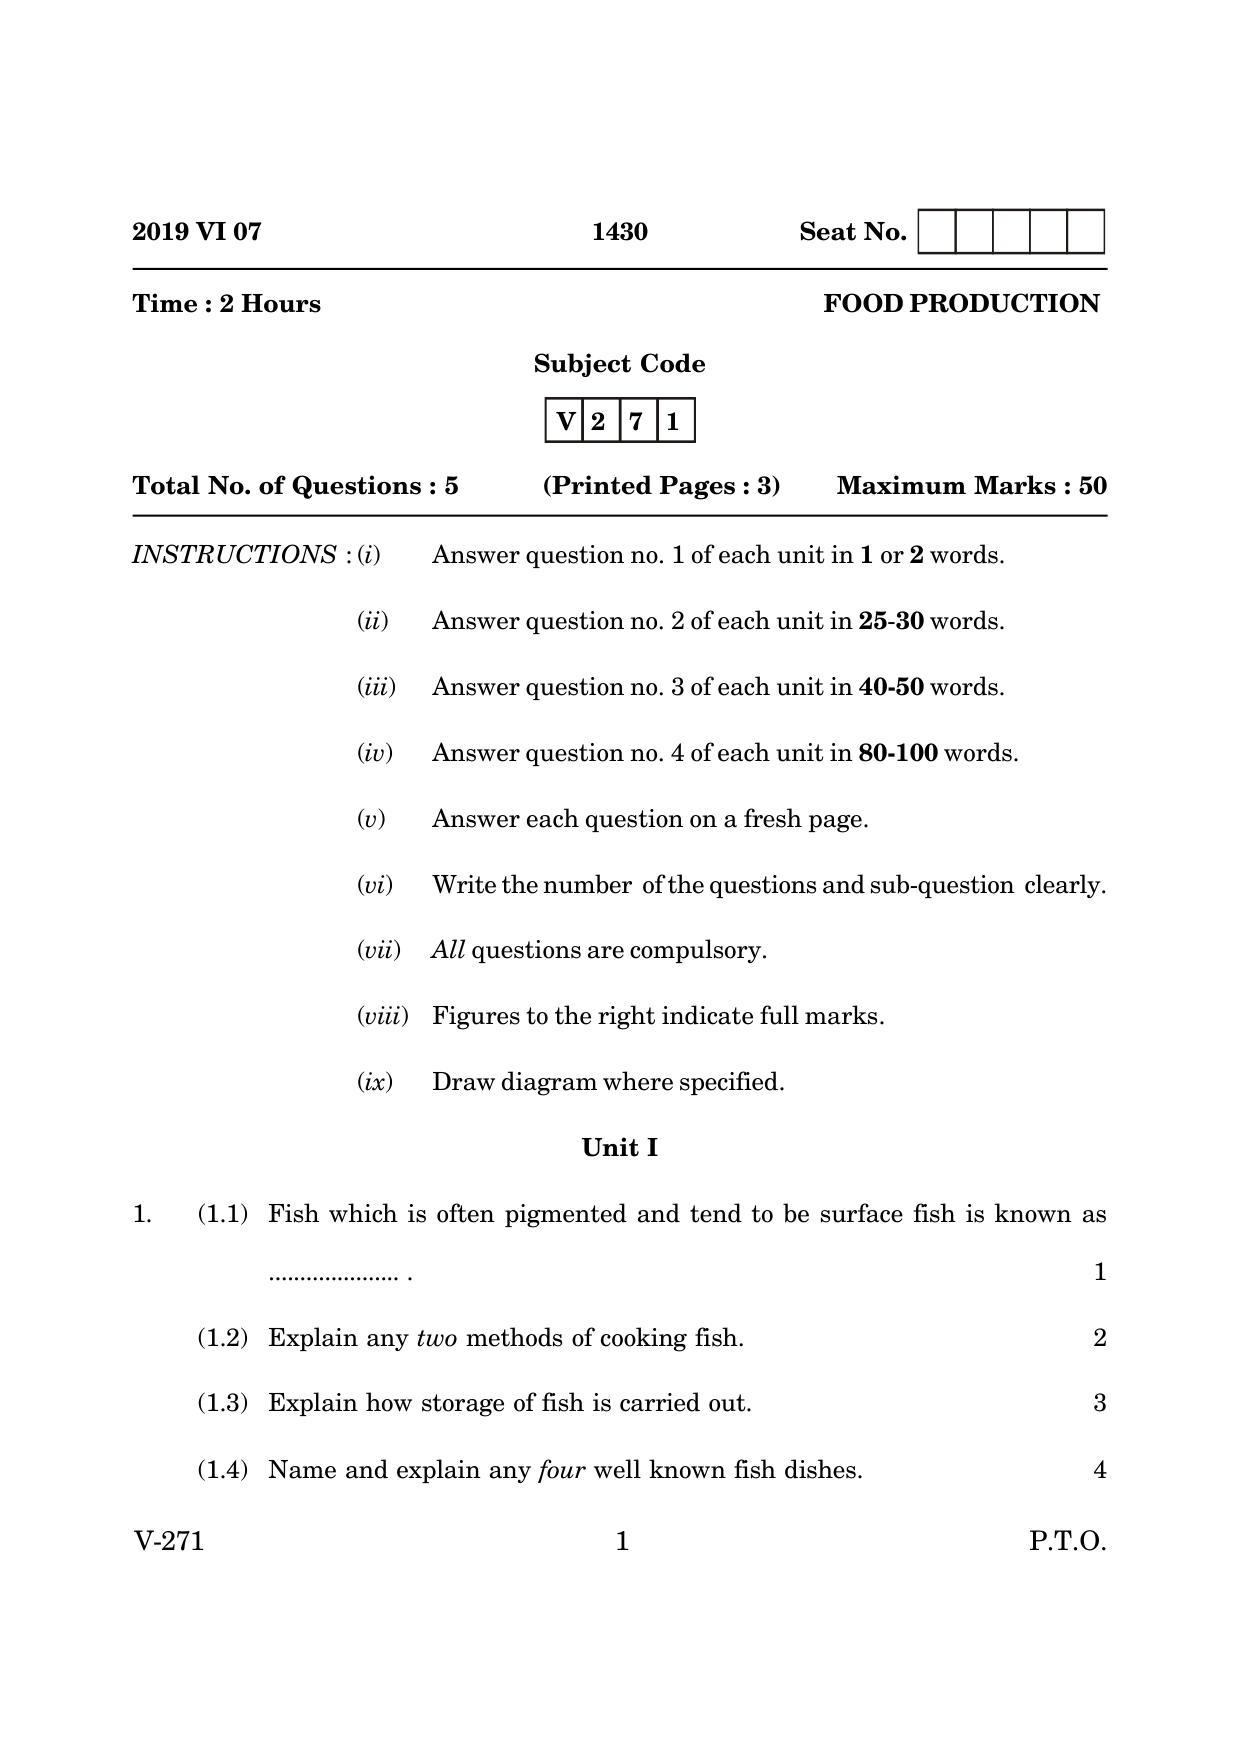 Goa Board Class 12 Food Production   (June 2019) Question Paper - Page 1